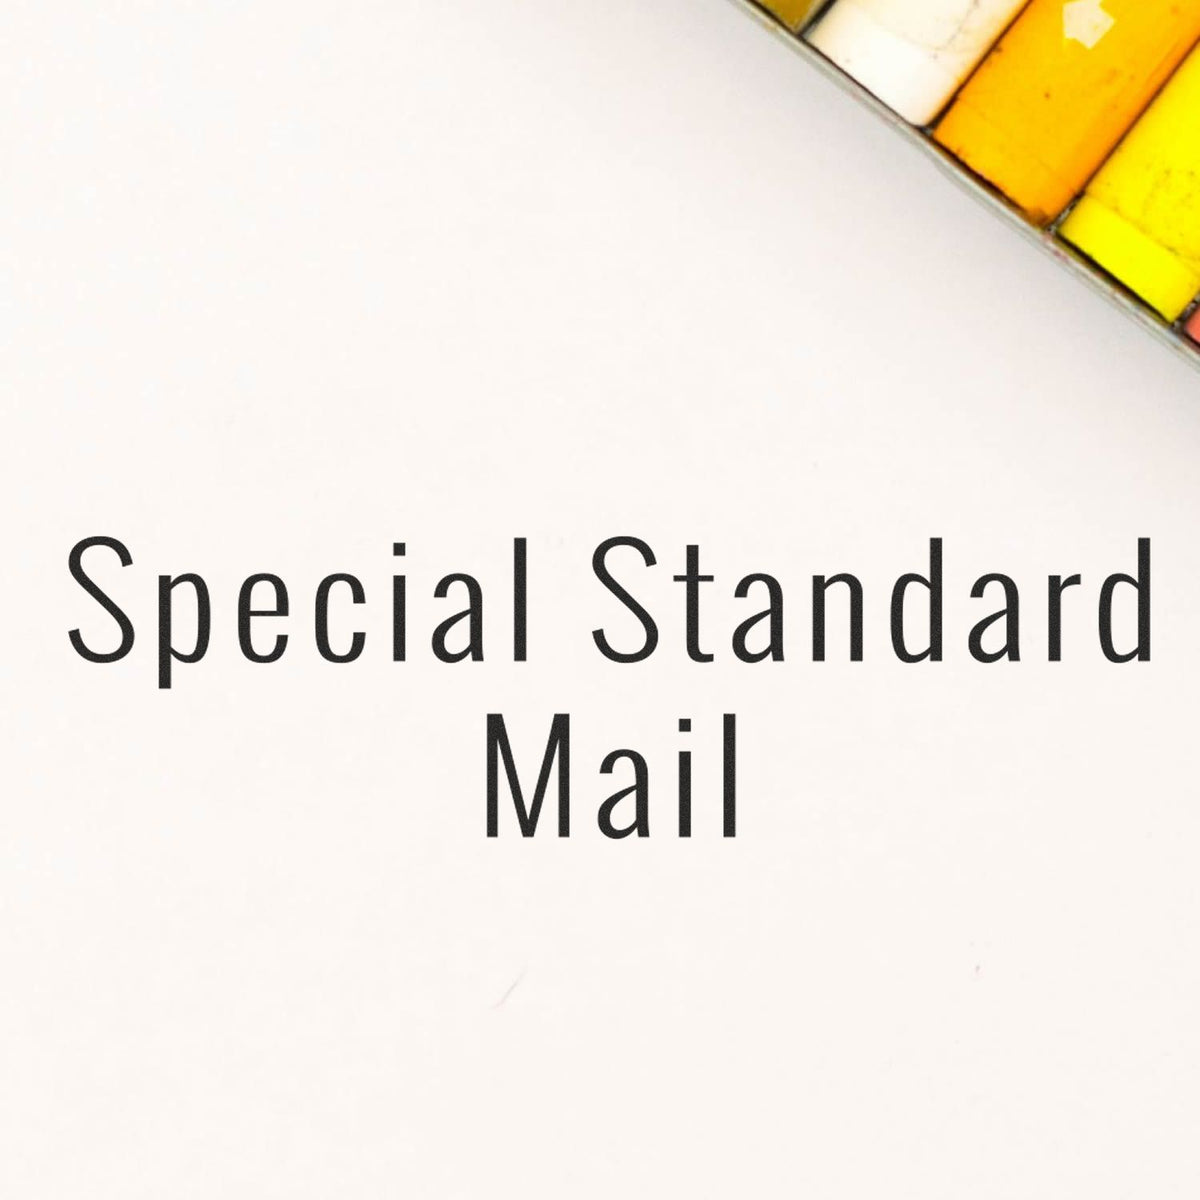 Special Standard Mail Rubber Stamp Lifestyle Photo